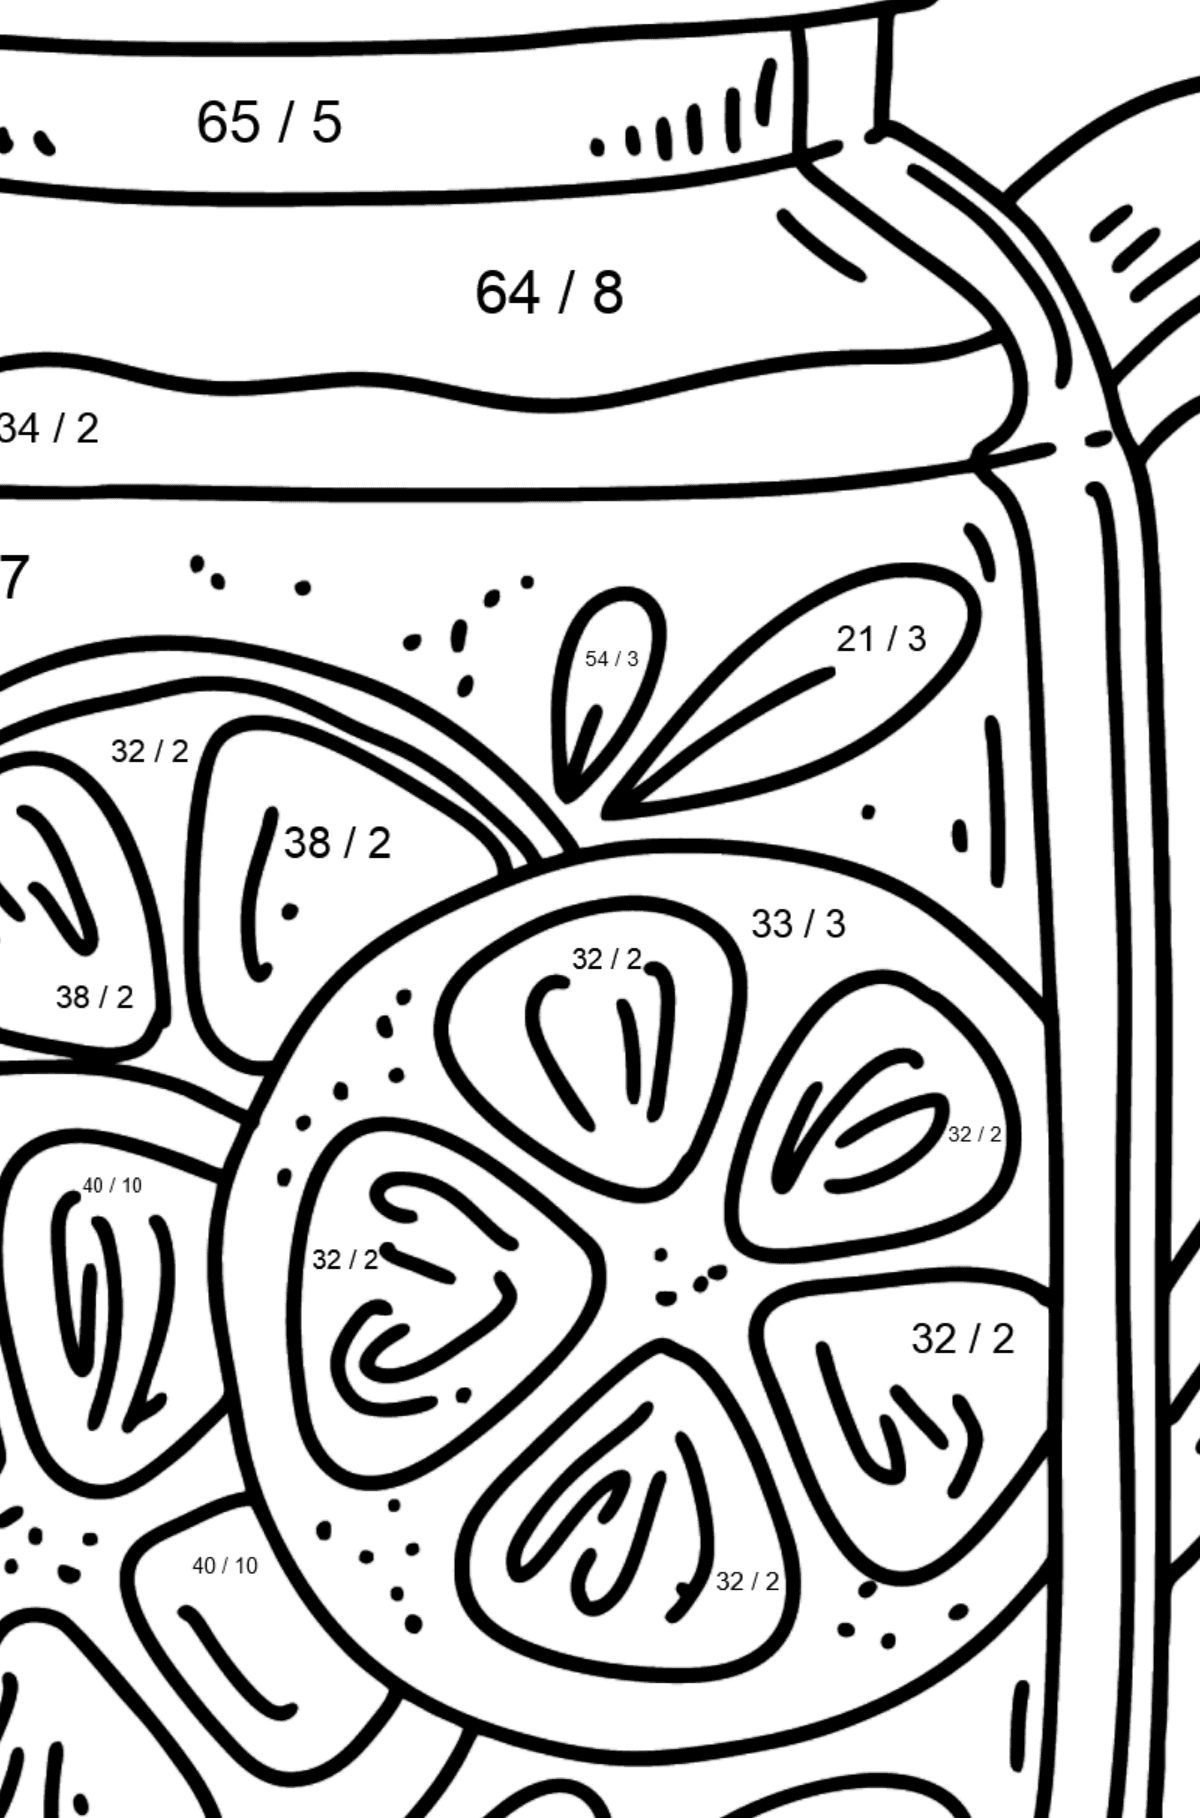 Delicious Lemonade coloring page - Math Coloring - Division for Kids